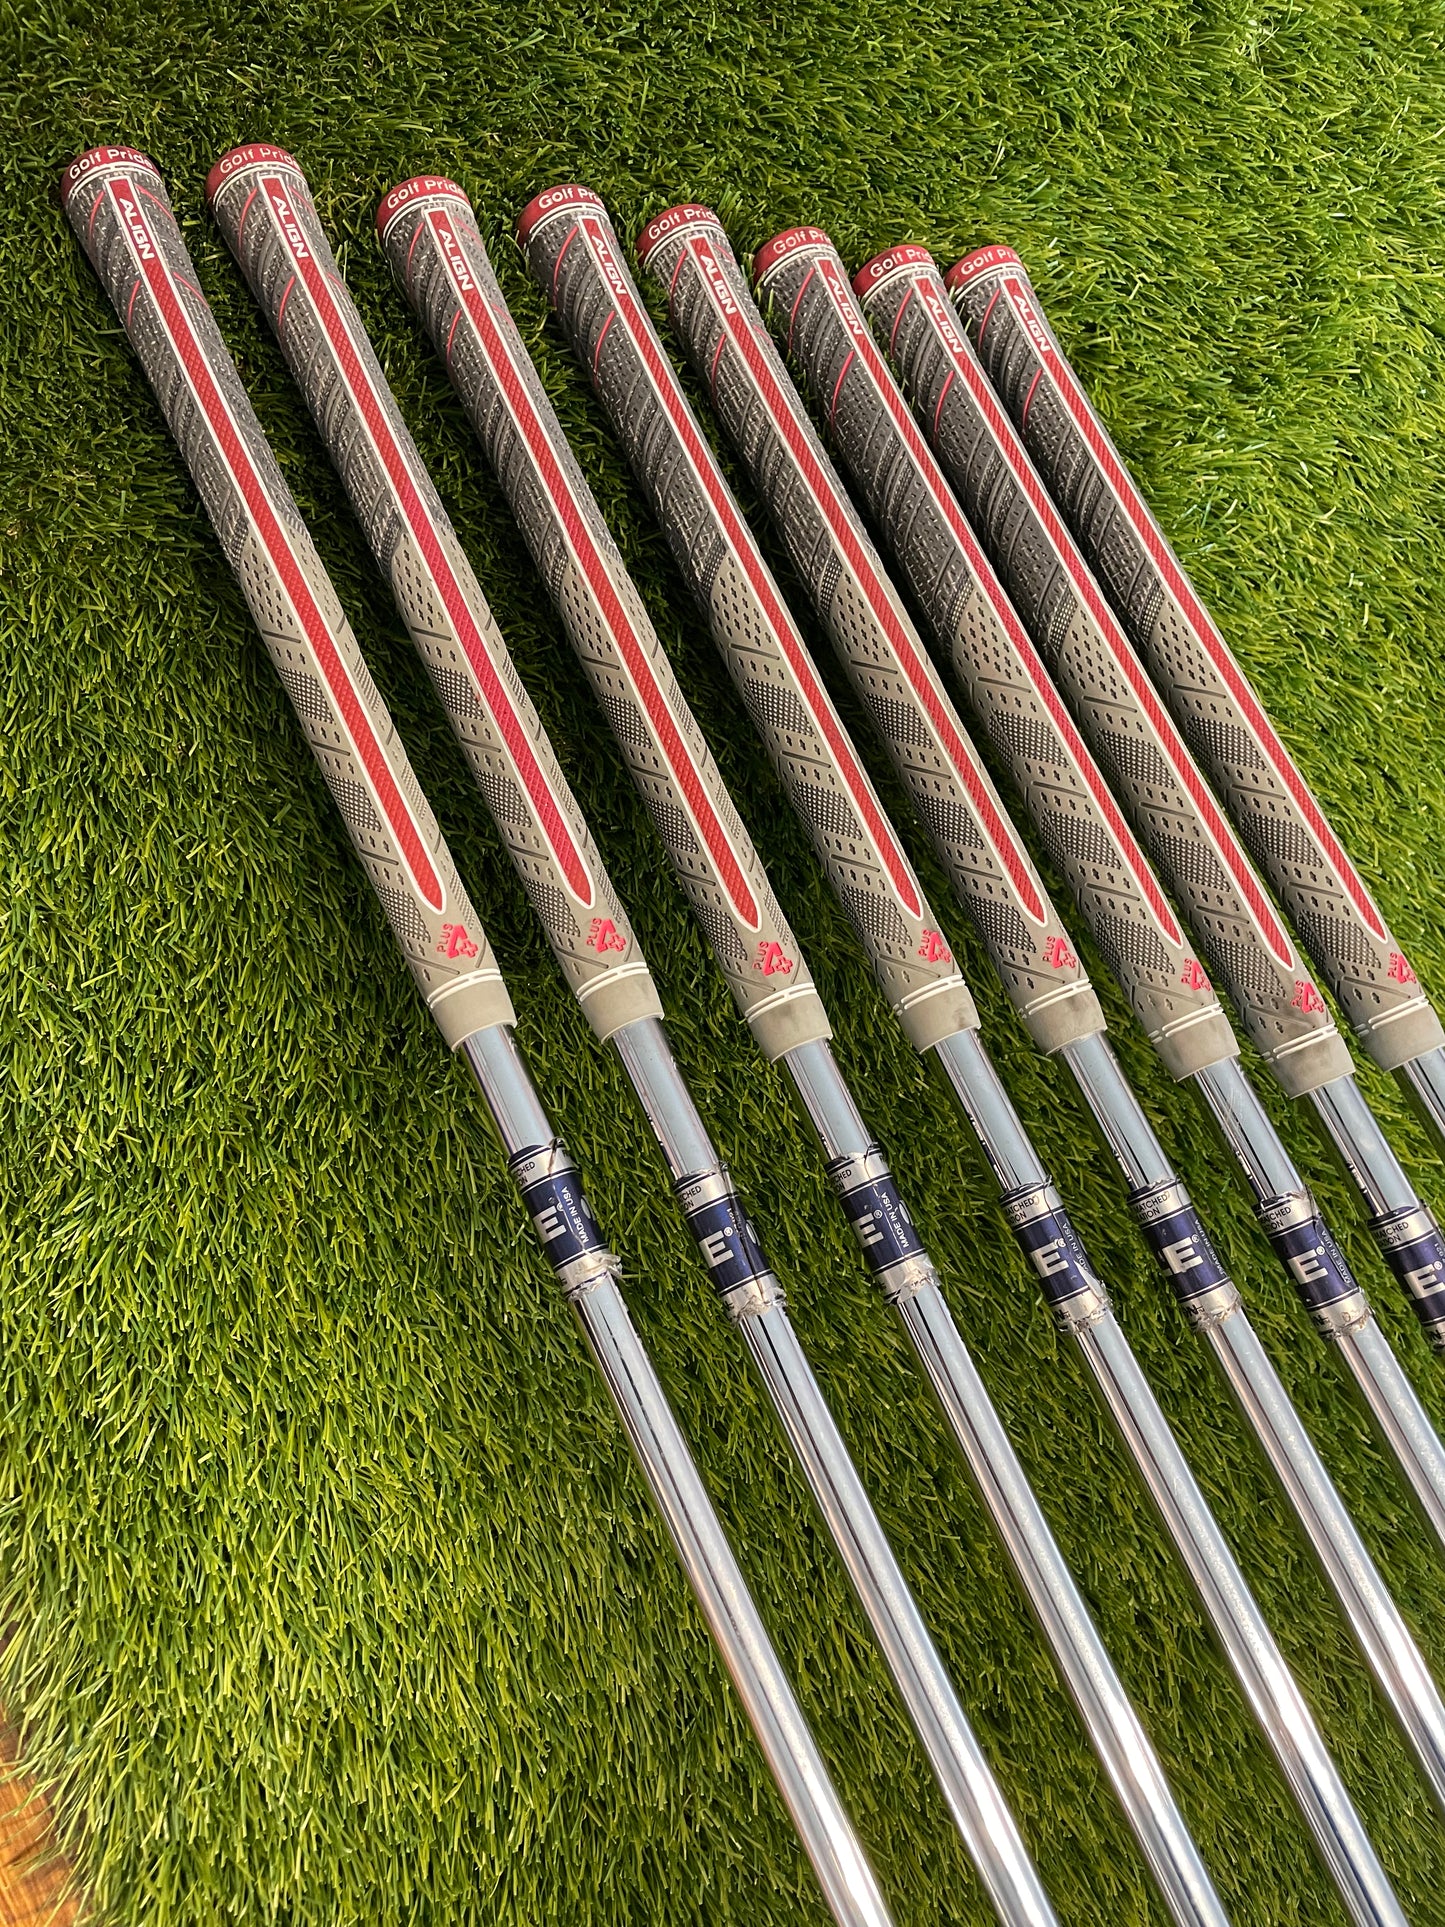 TAYLORMADE TP IRONS 3-PW REG FLEX SHAFTS FREE DELIVERY